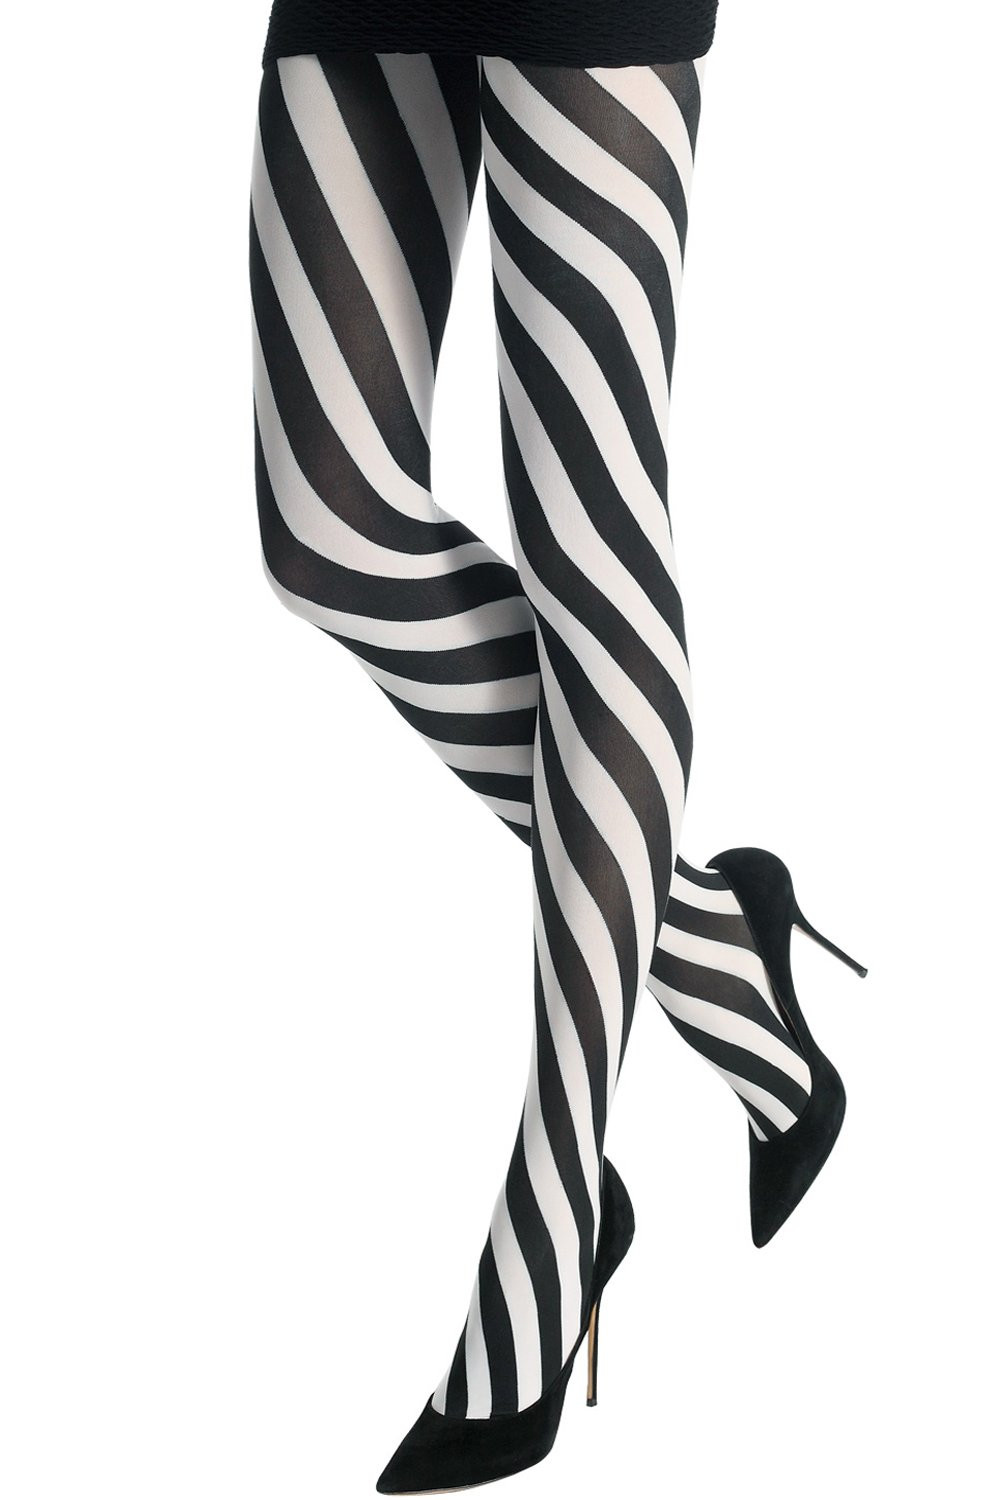 TWO TONED SPIRAL TIGHTS